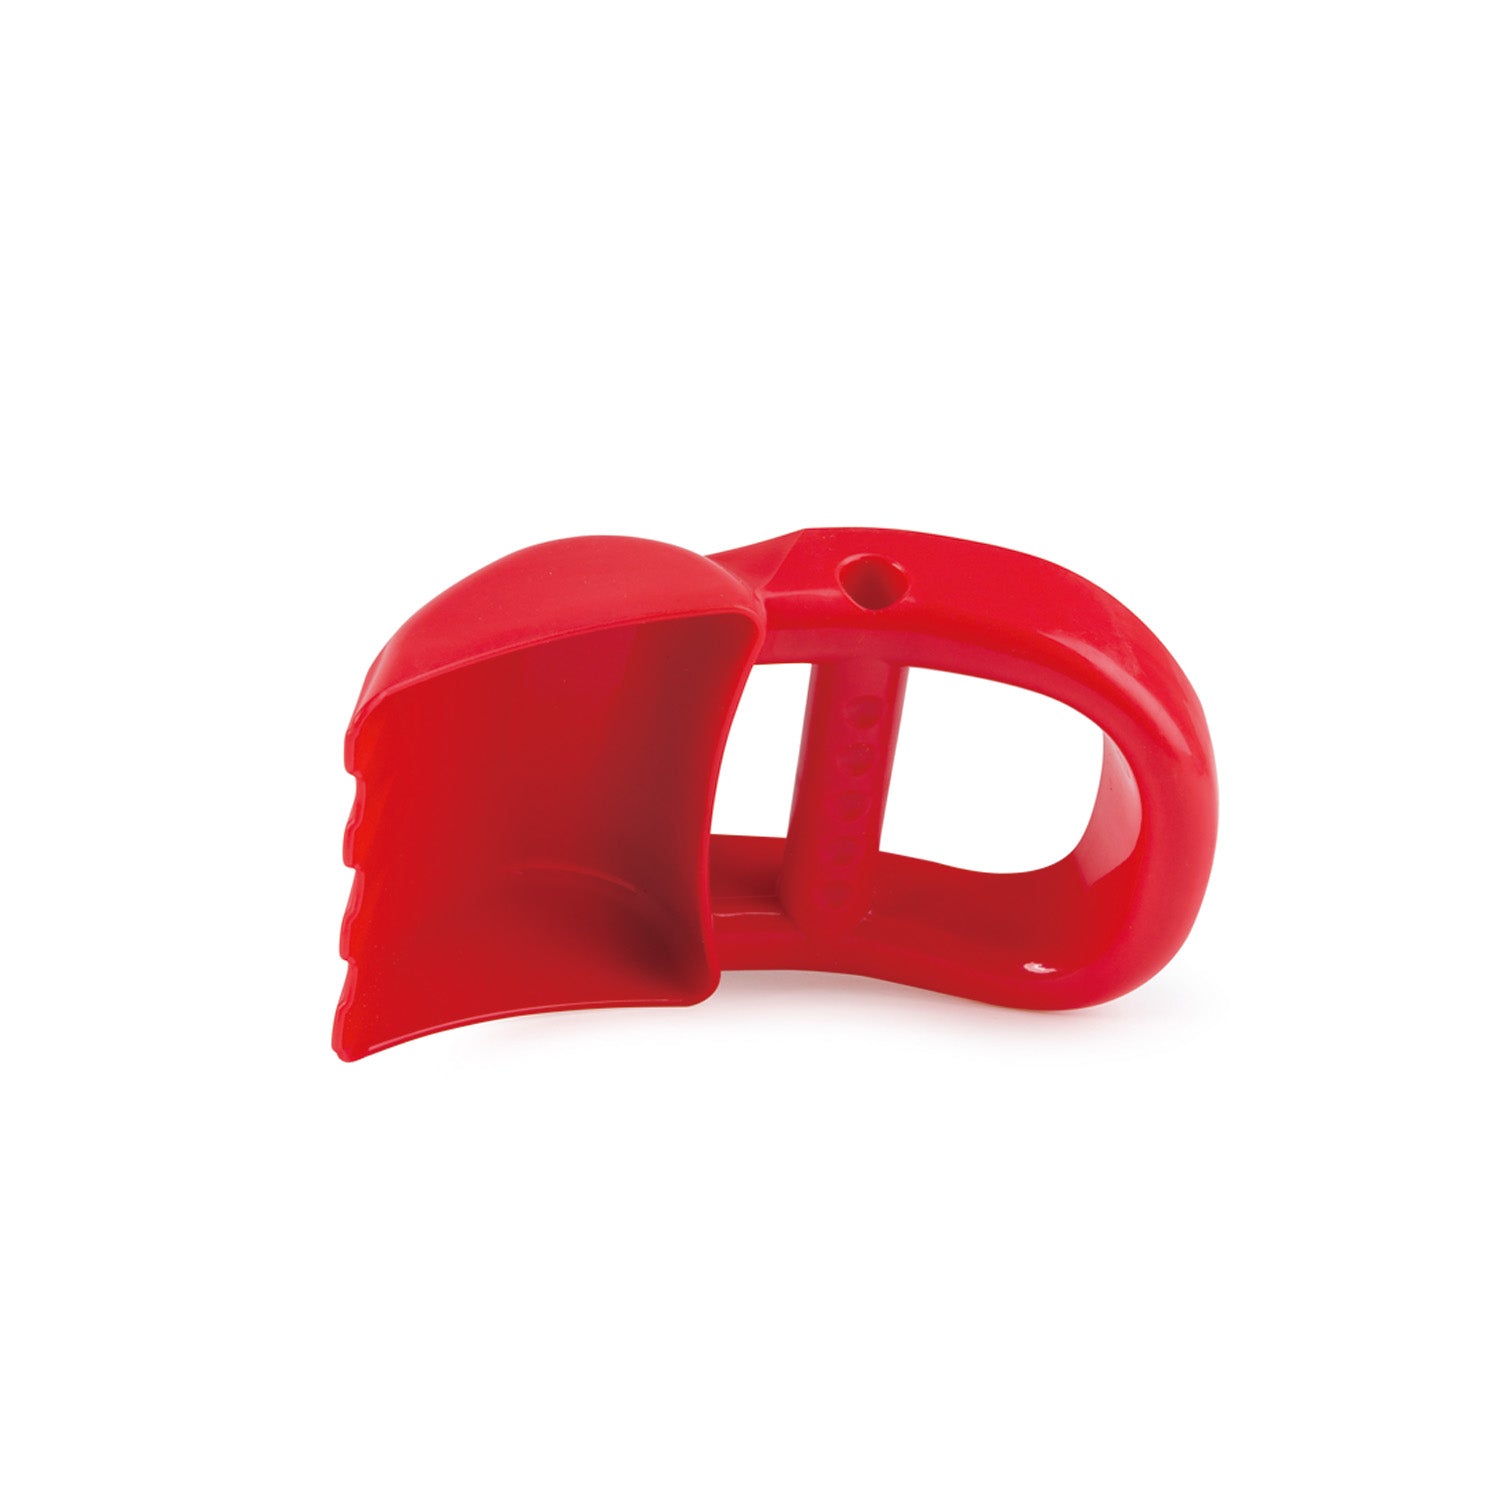 Hape Hand Digger - Red perfect for the sand or backyard play with quality outdoor toys The Toy Wagon